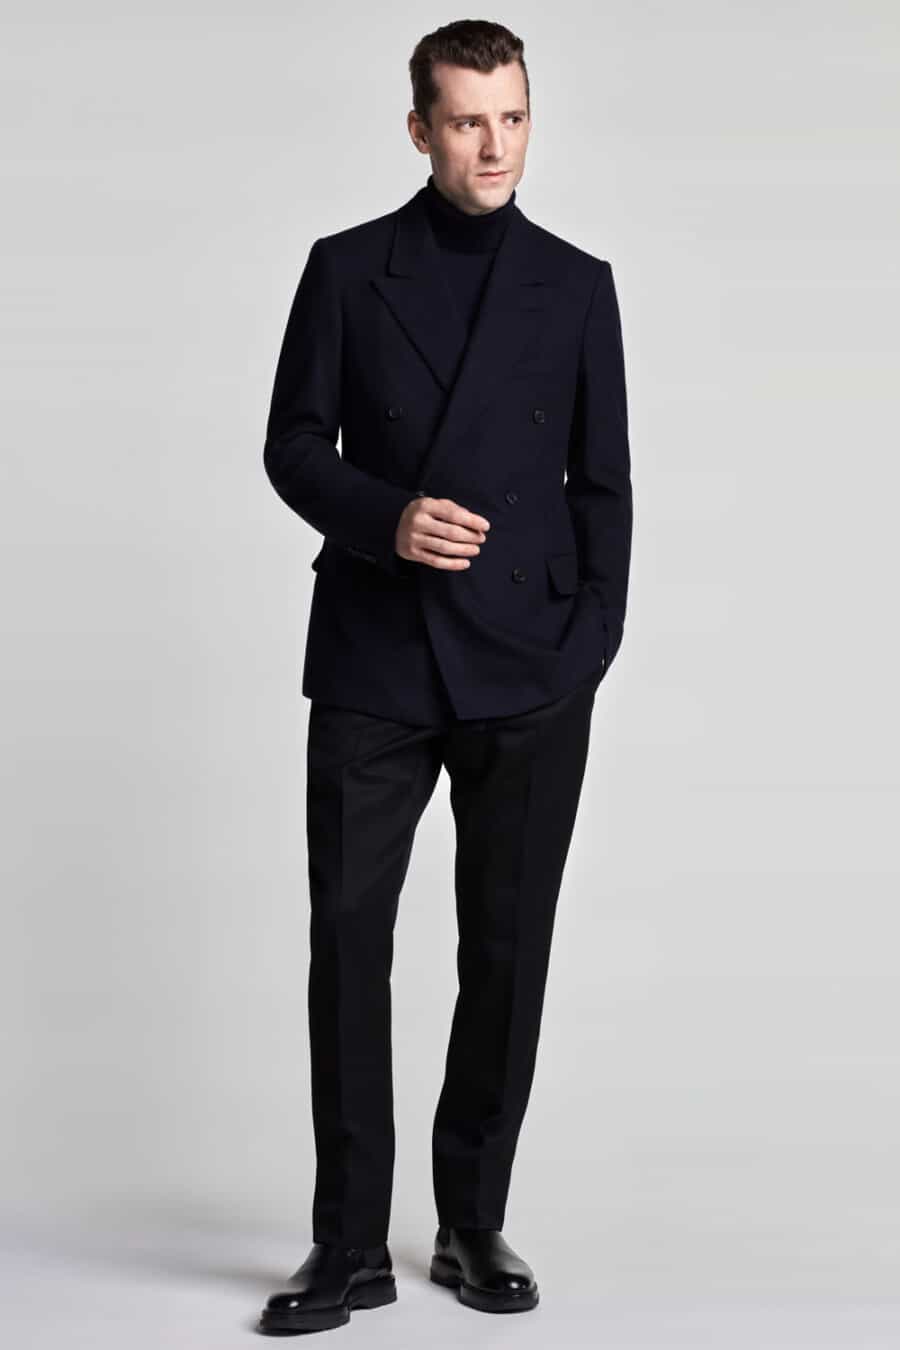 Men's navy double-breasted suit, navy turtleneck and black leather Chelsea boots outfit